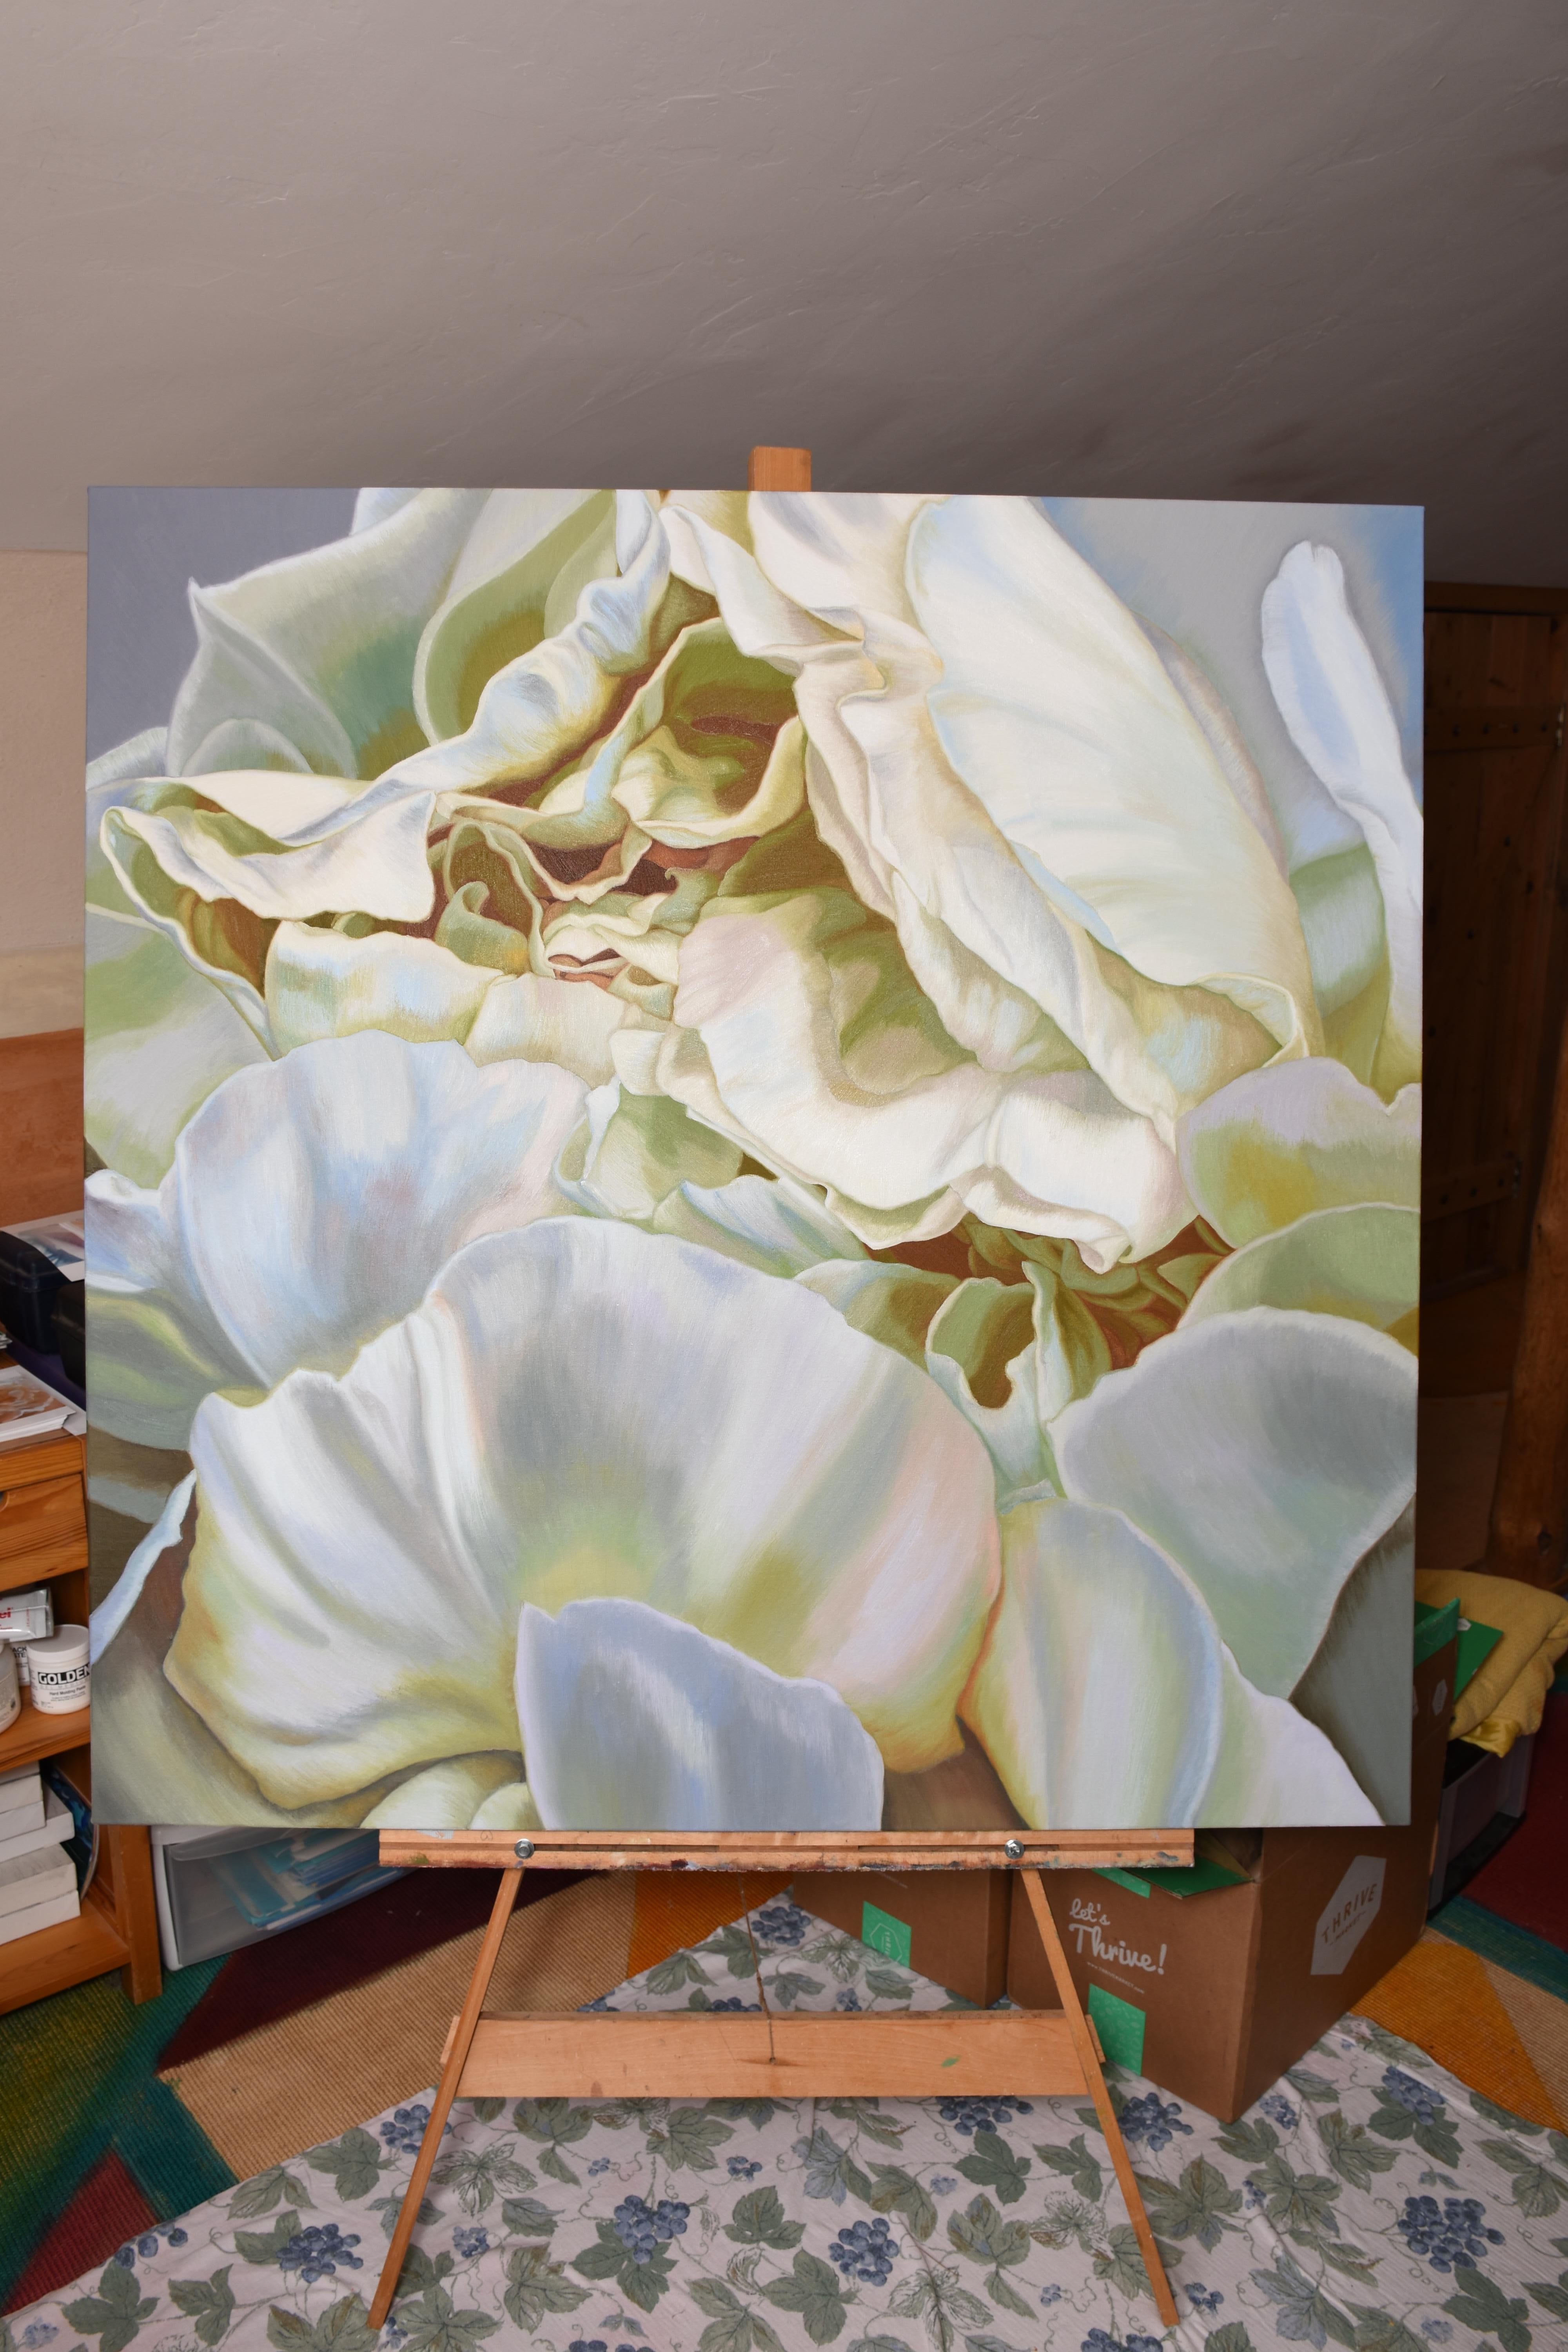 Green Peony 2 (floral painting, realist, canvas, white flower art, oil, realism) - Painting by Chloe Hedden